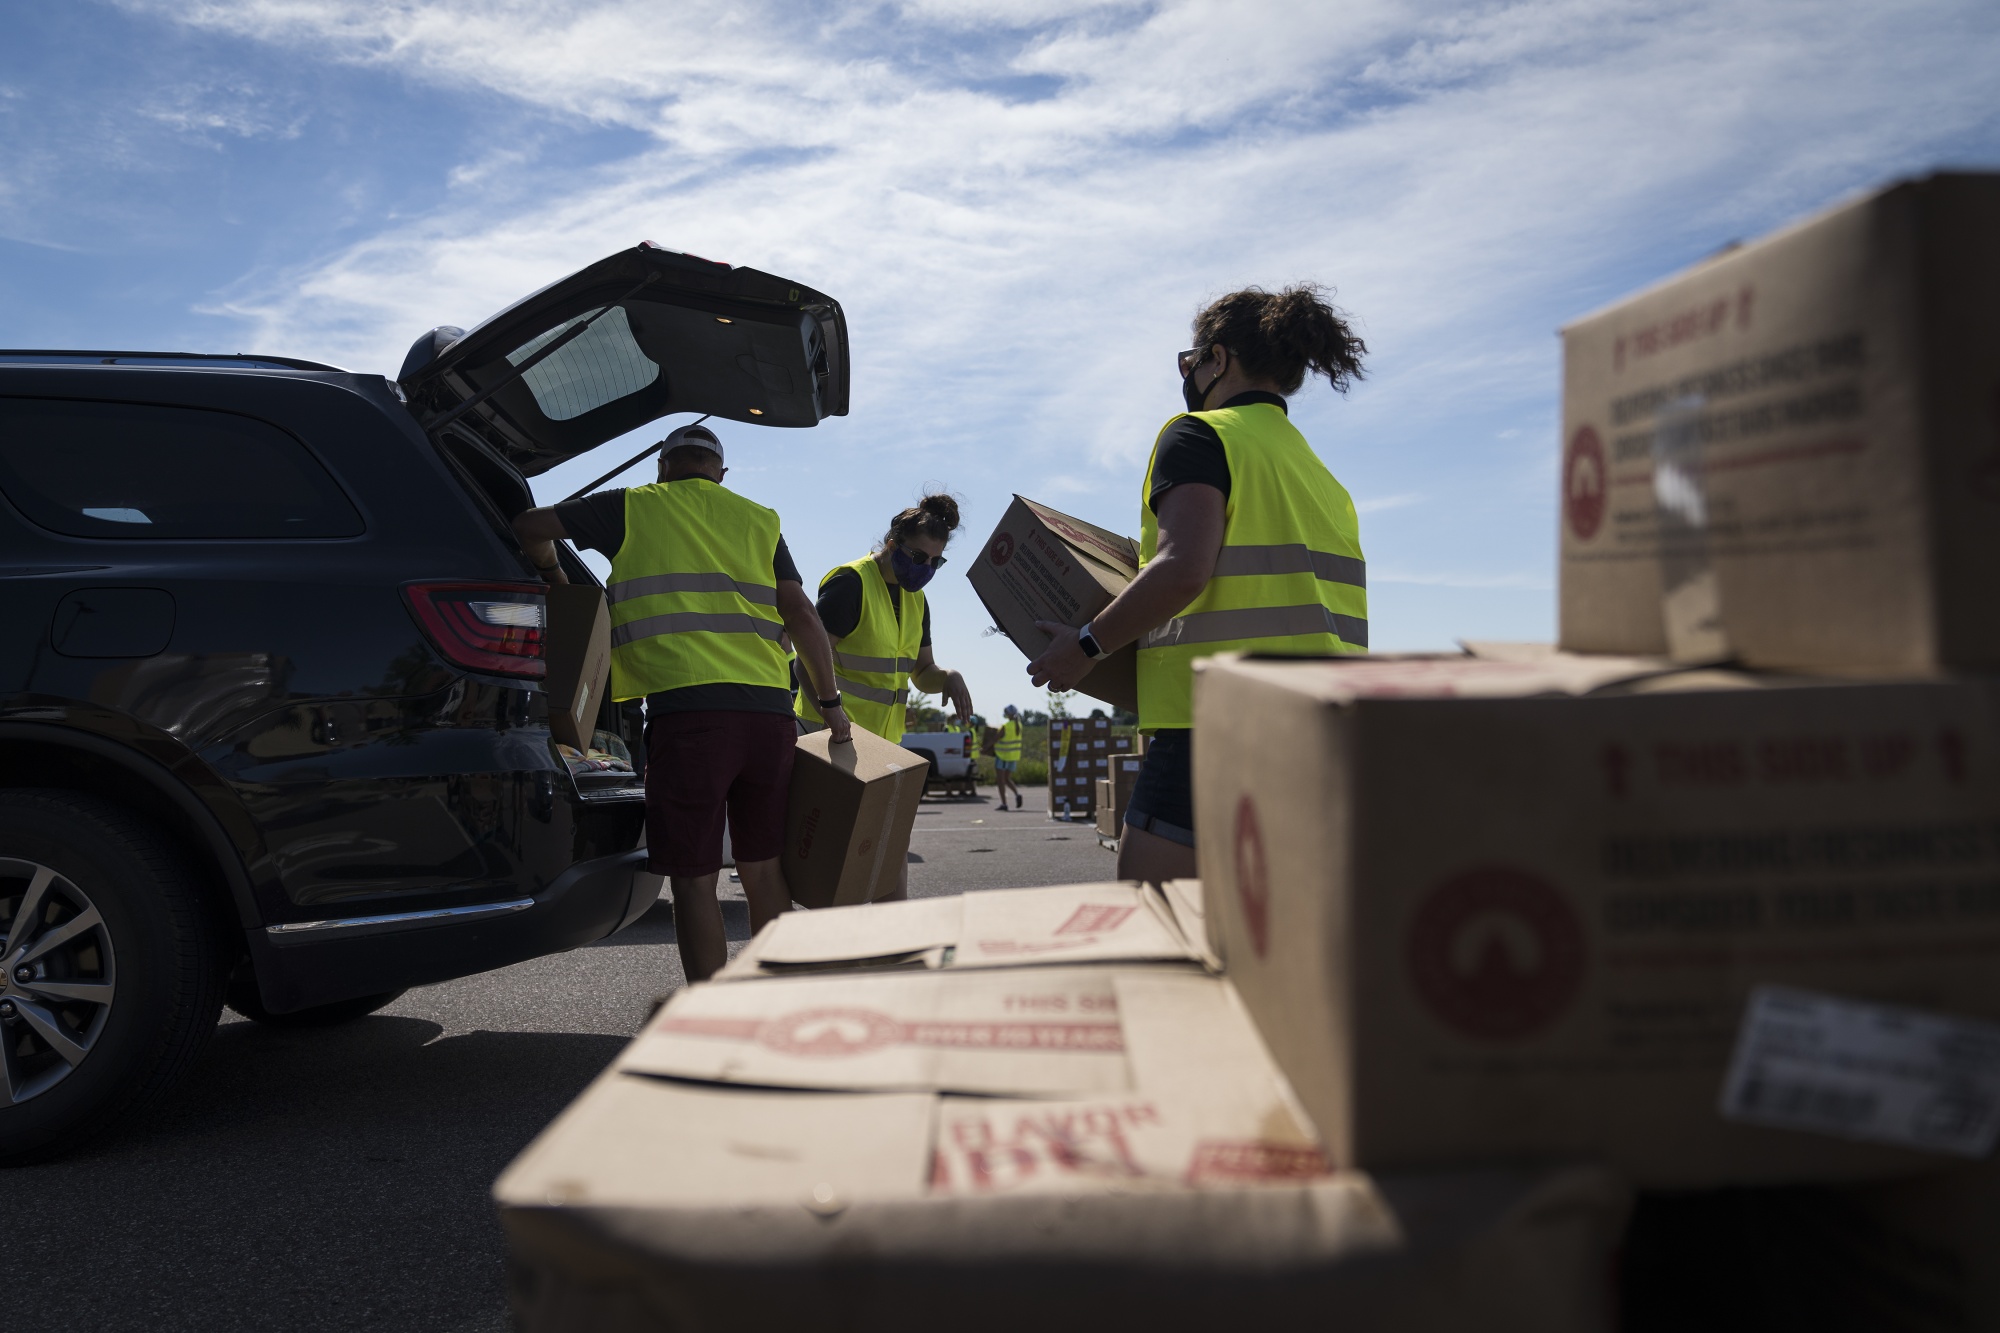 Volunteers unload and distribute food items at a pop-up grocery event at Prairie Winds Middle School in Mankato, Minnesota on July 23, 2020. 